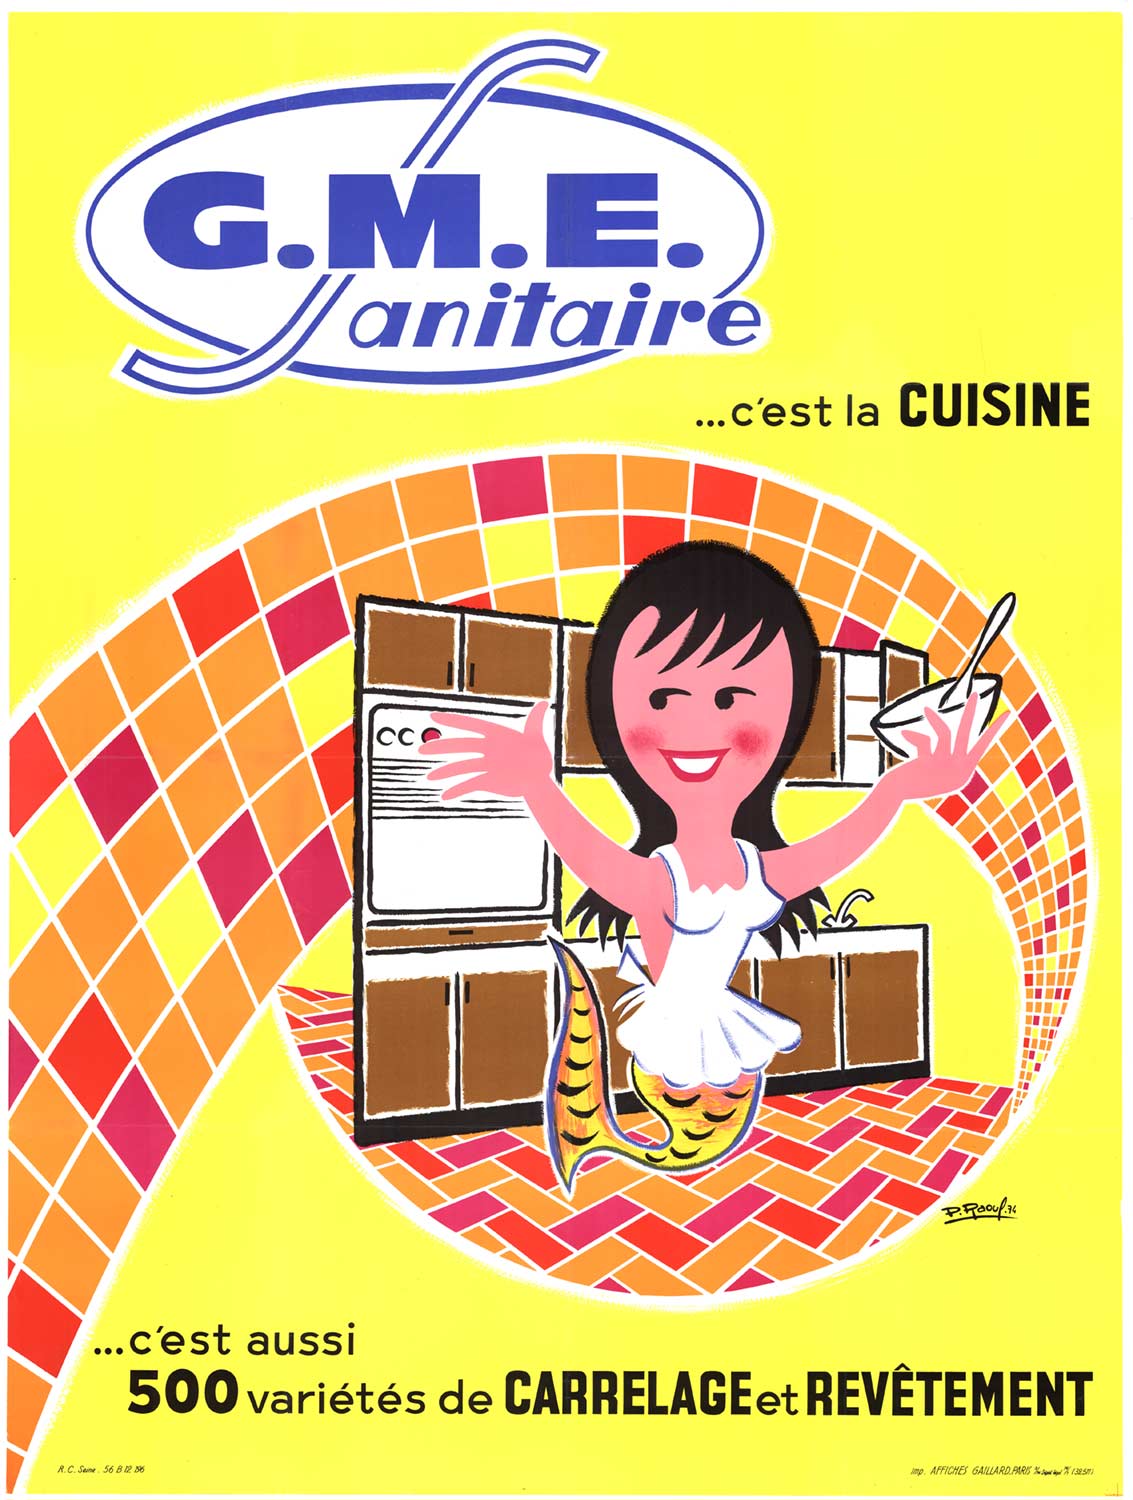 Original G.M.E. Sanitaire vintage French poster. Linen backed in very good condition and ready to frame. <br> <br>GME Sanitaire c'est la Cuisine is a French vintage poster that has been linen backed for preservation. The poster advertises the GME tile a